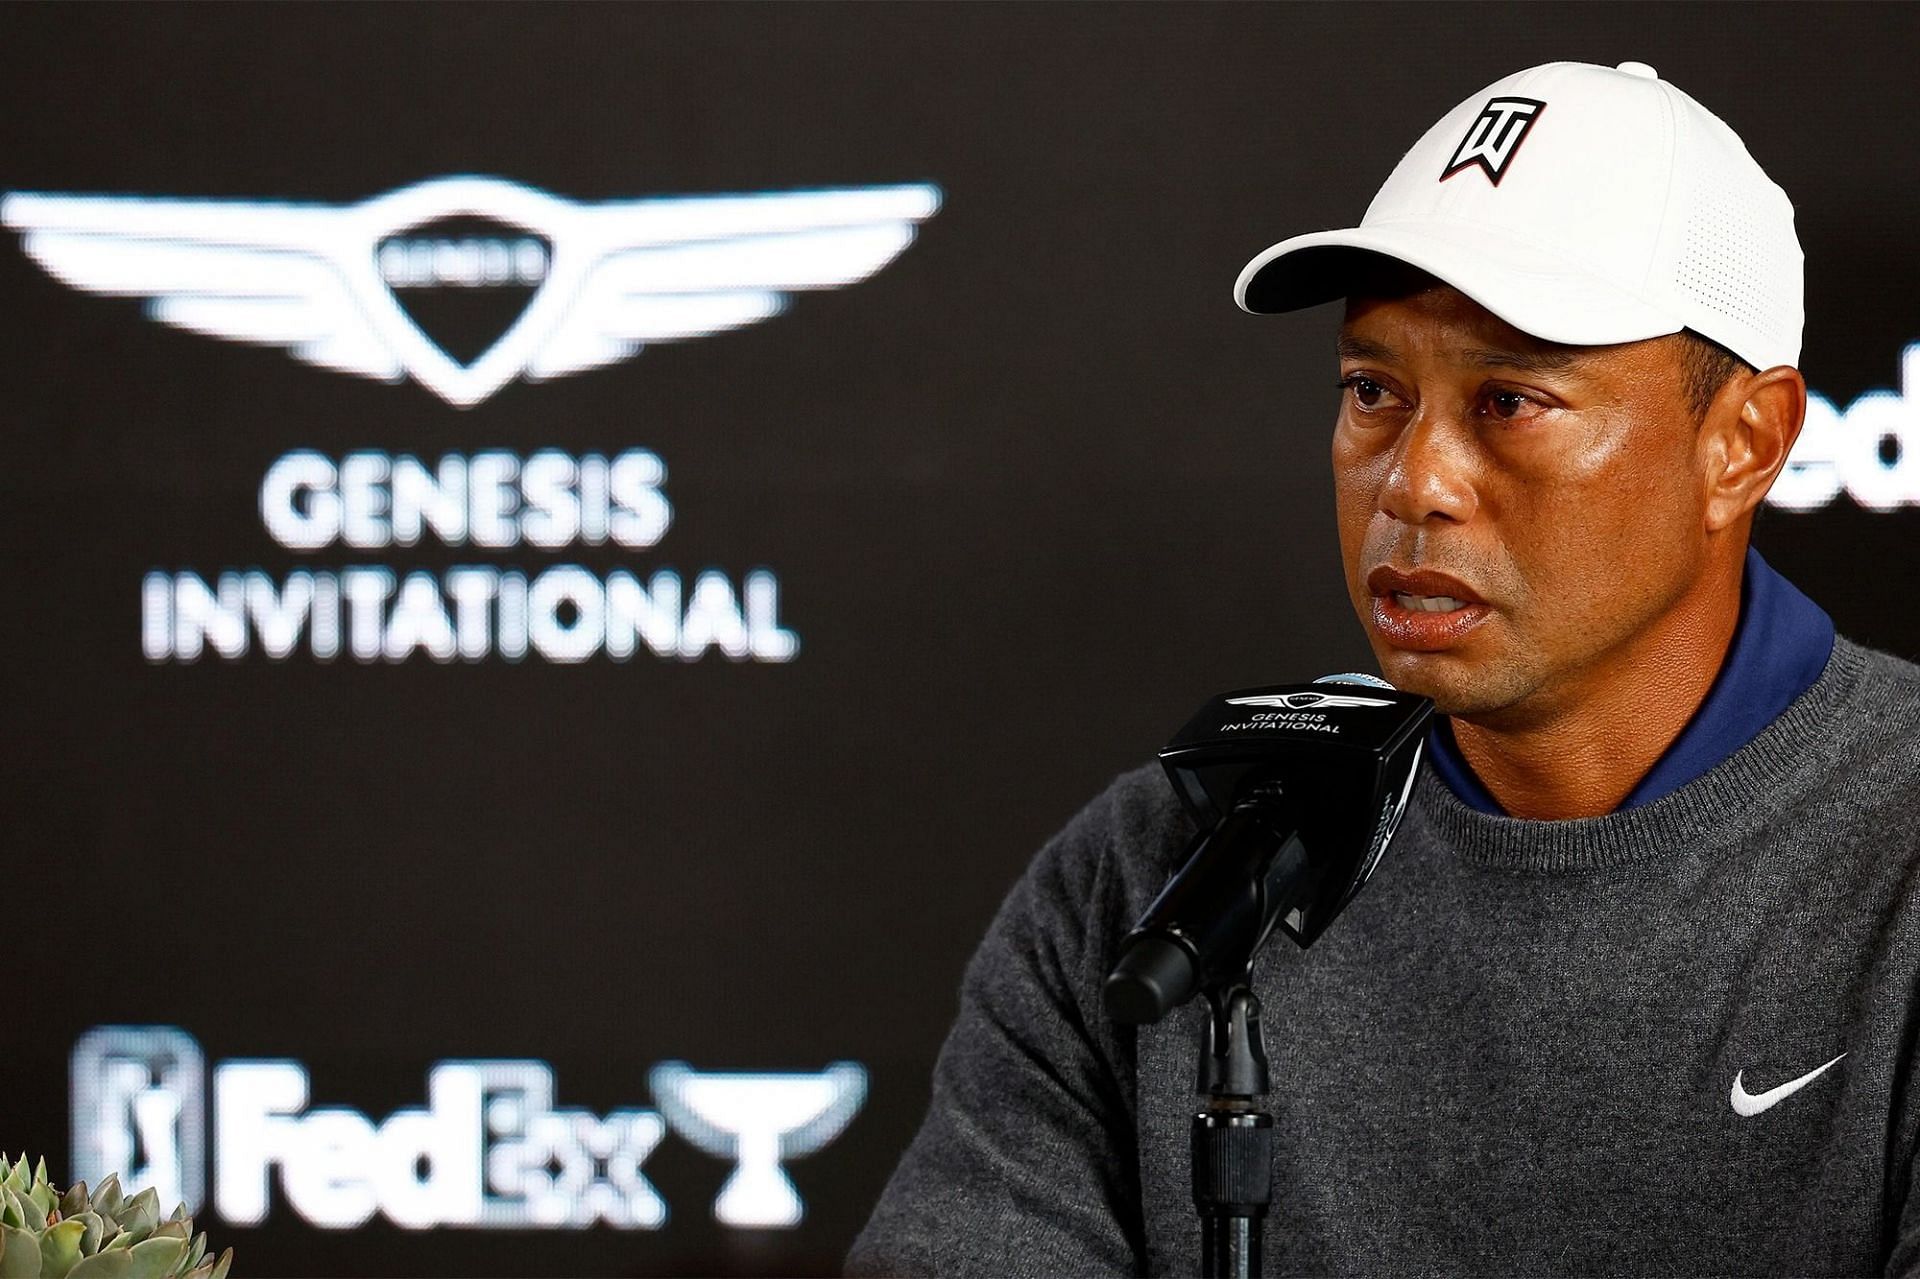 “I’m playing to win” Tiger Woods has eyes set on the prize in his